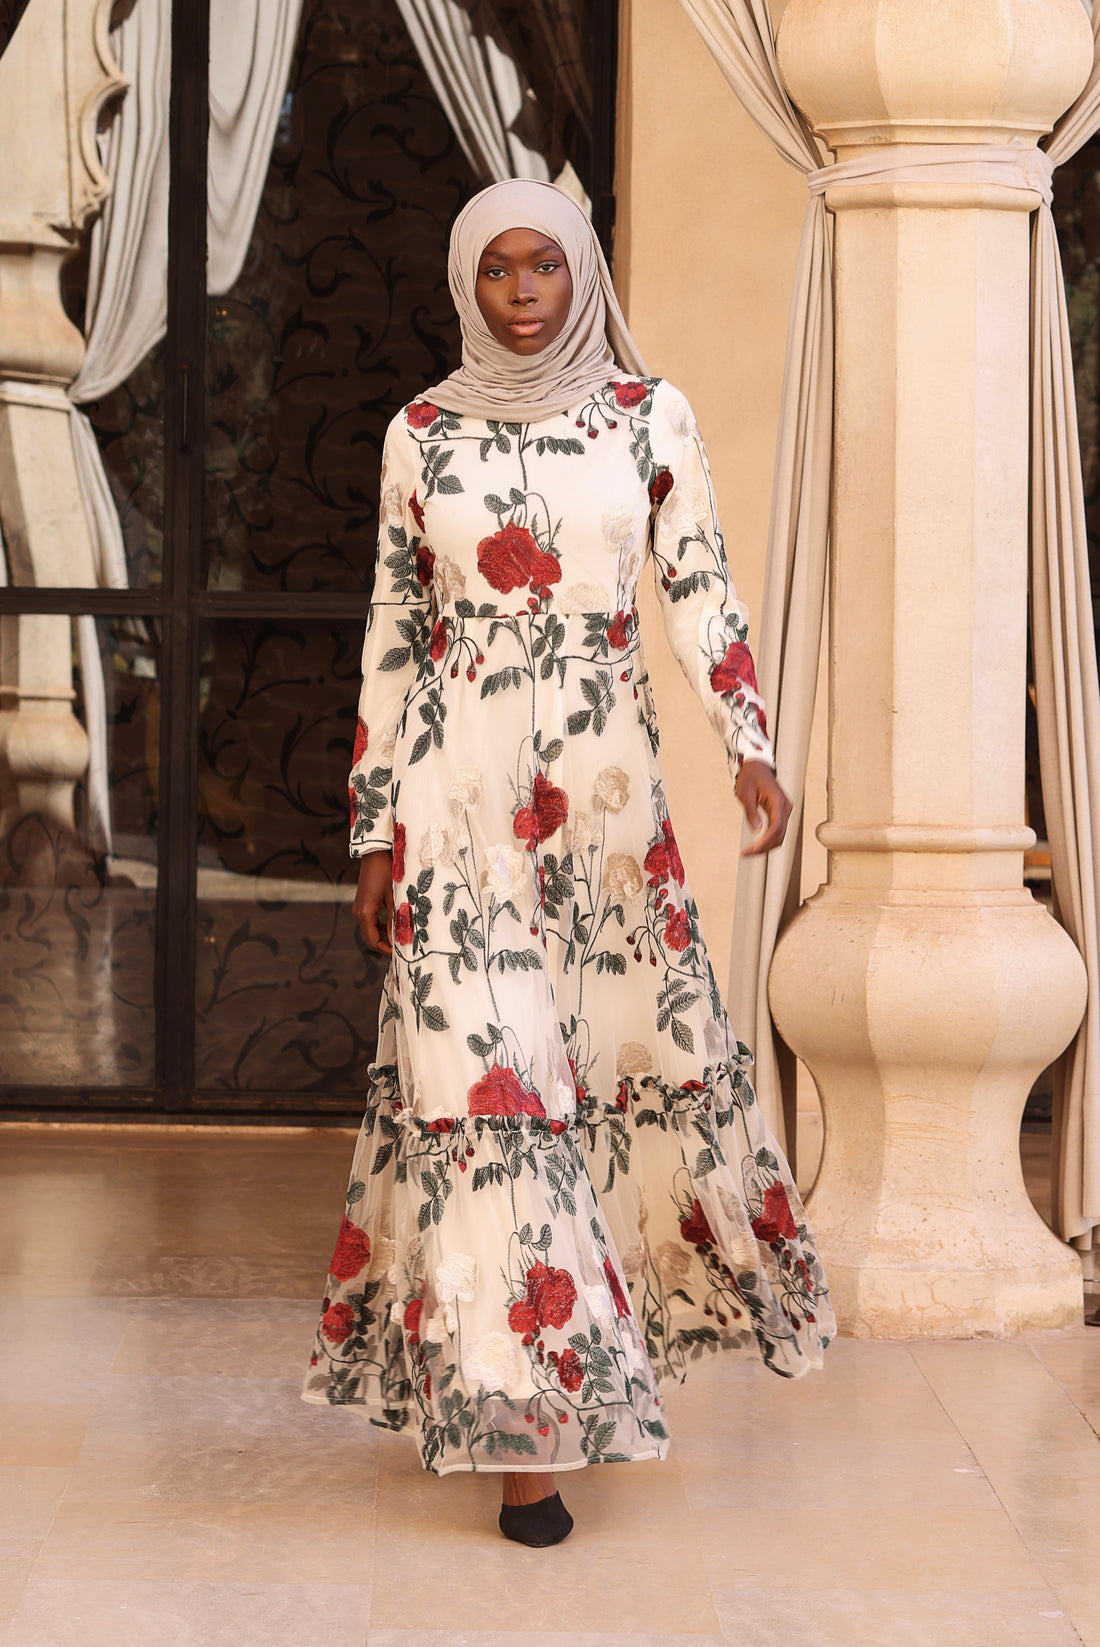 Modest Islamic Clothing, Abayas & Hijabs for Women